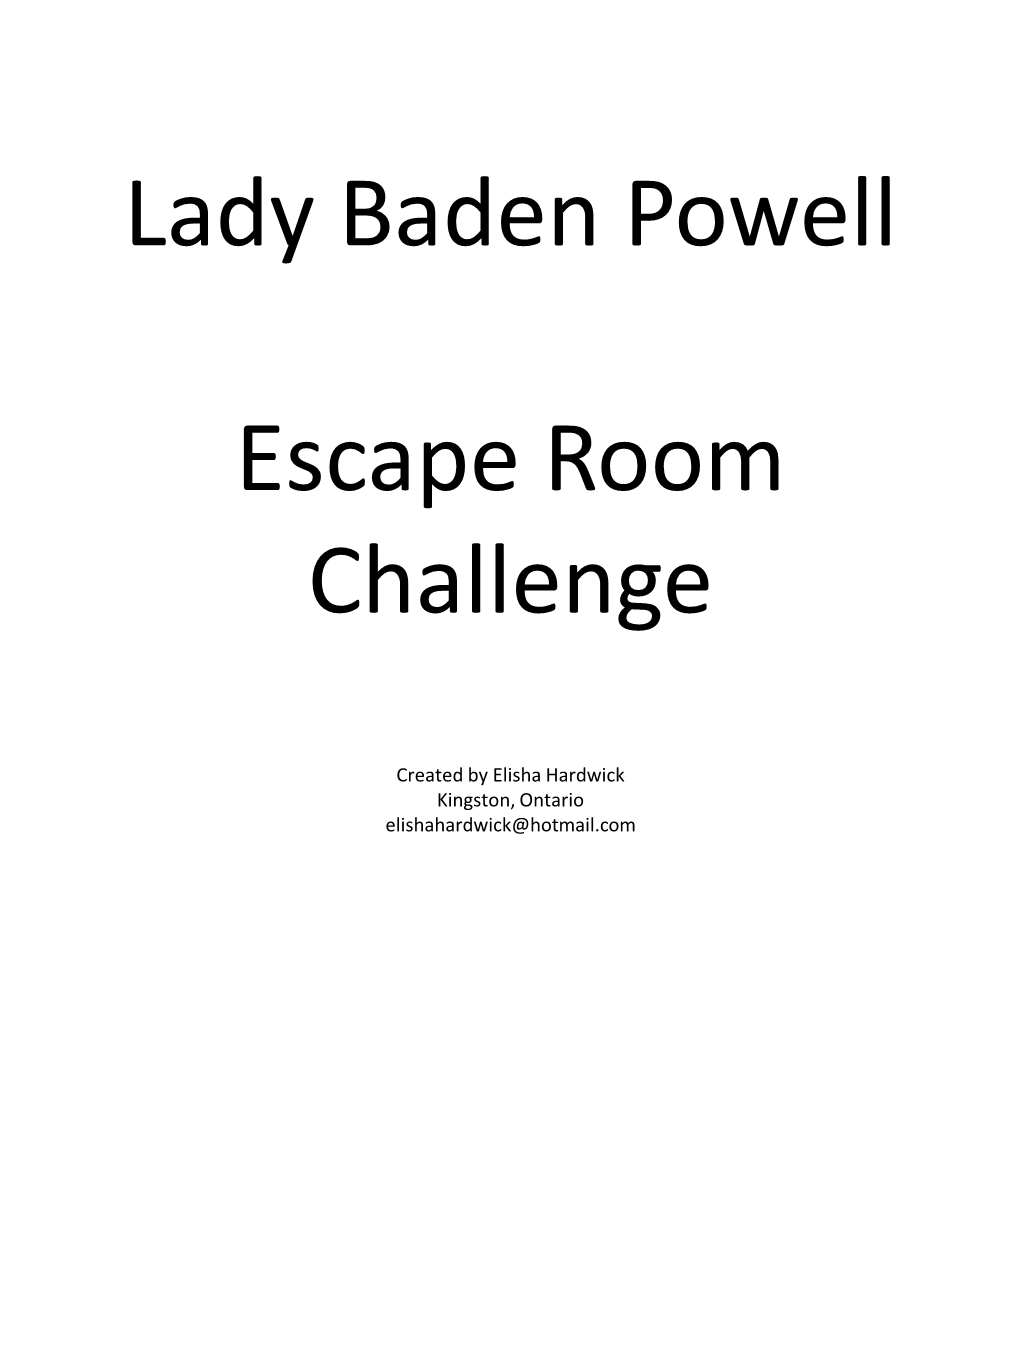 Lady Baden Powell Escape Room Challenge